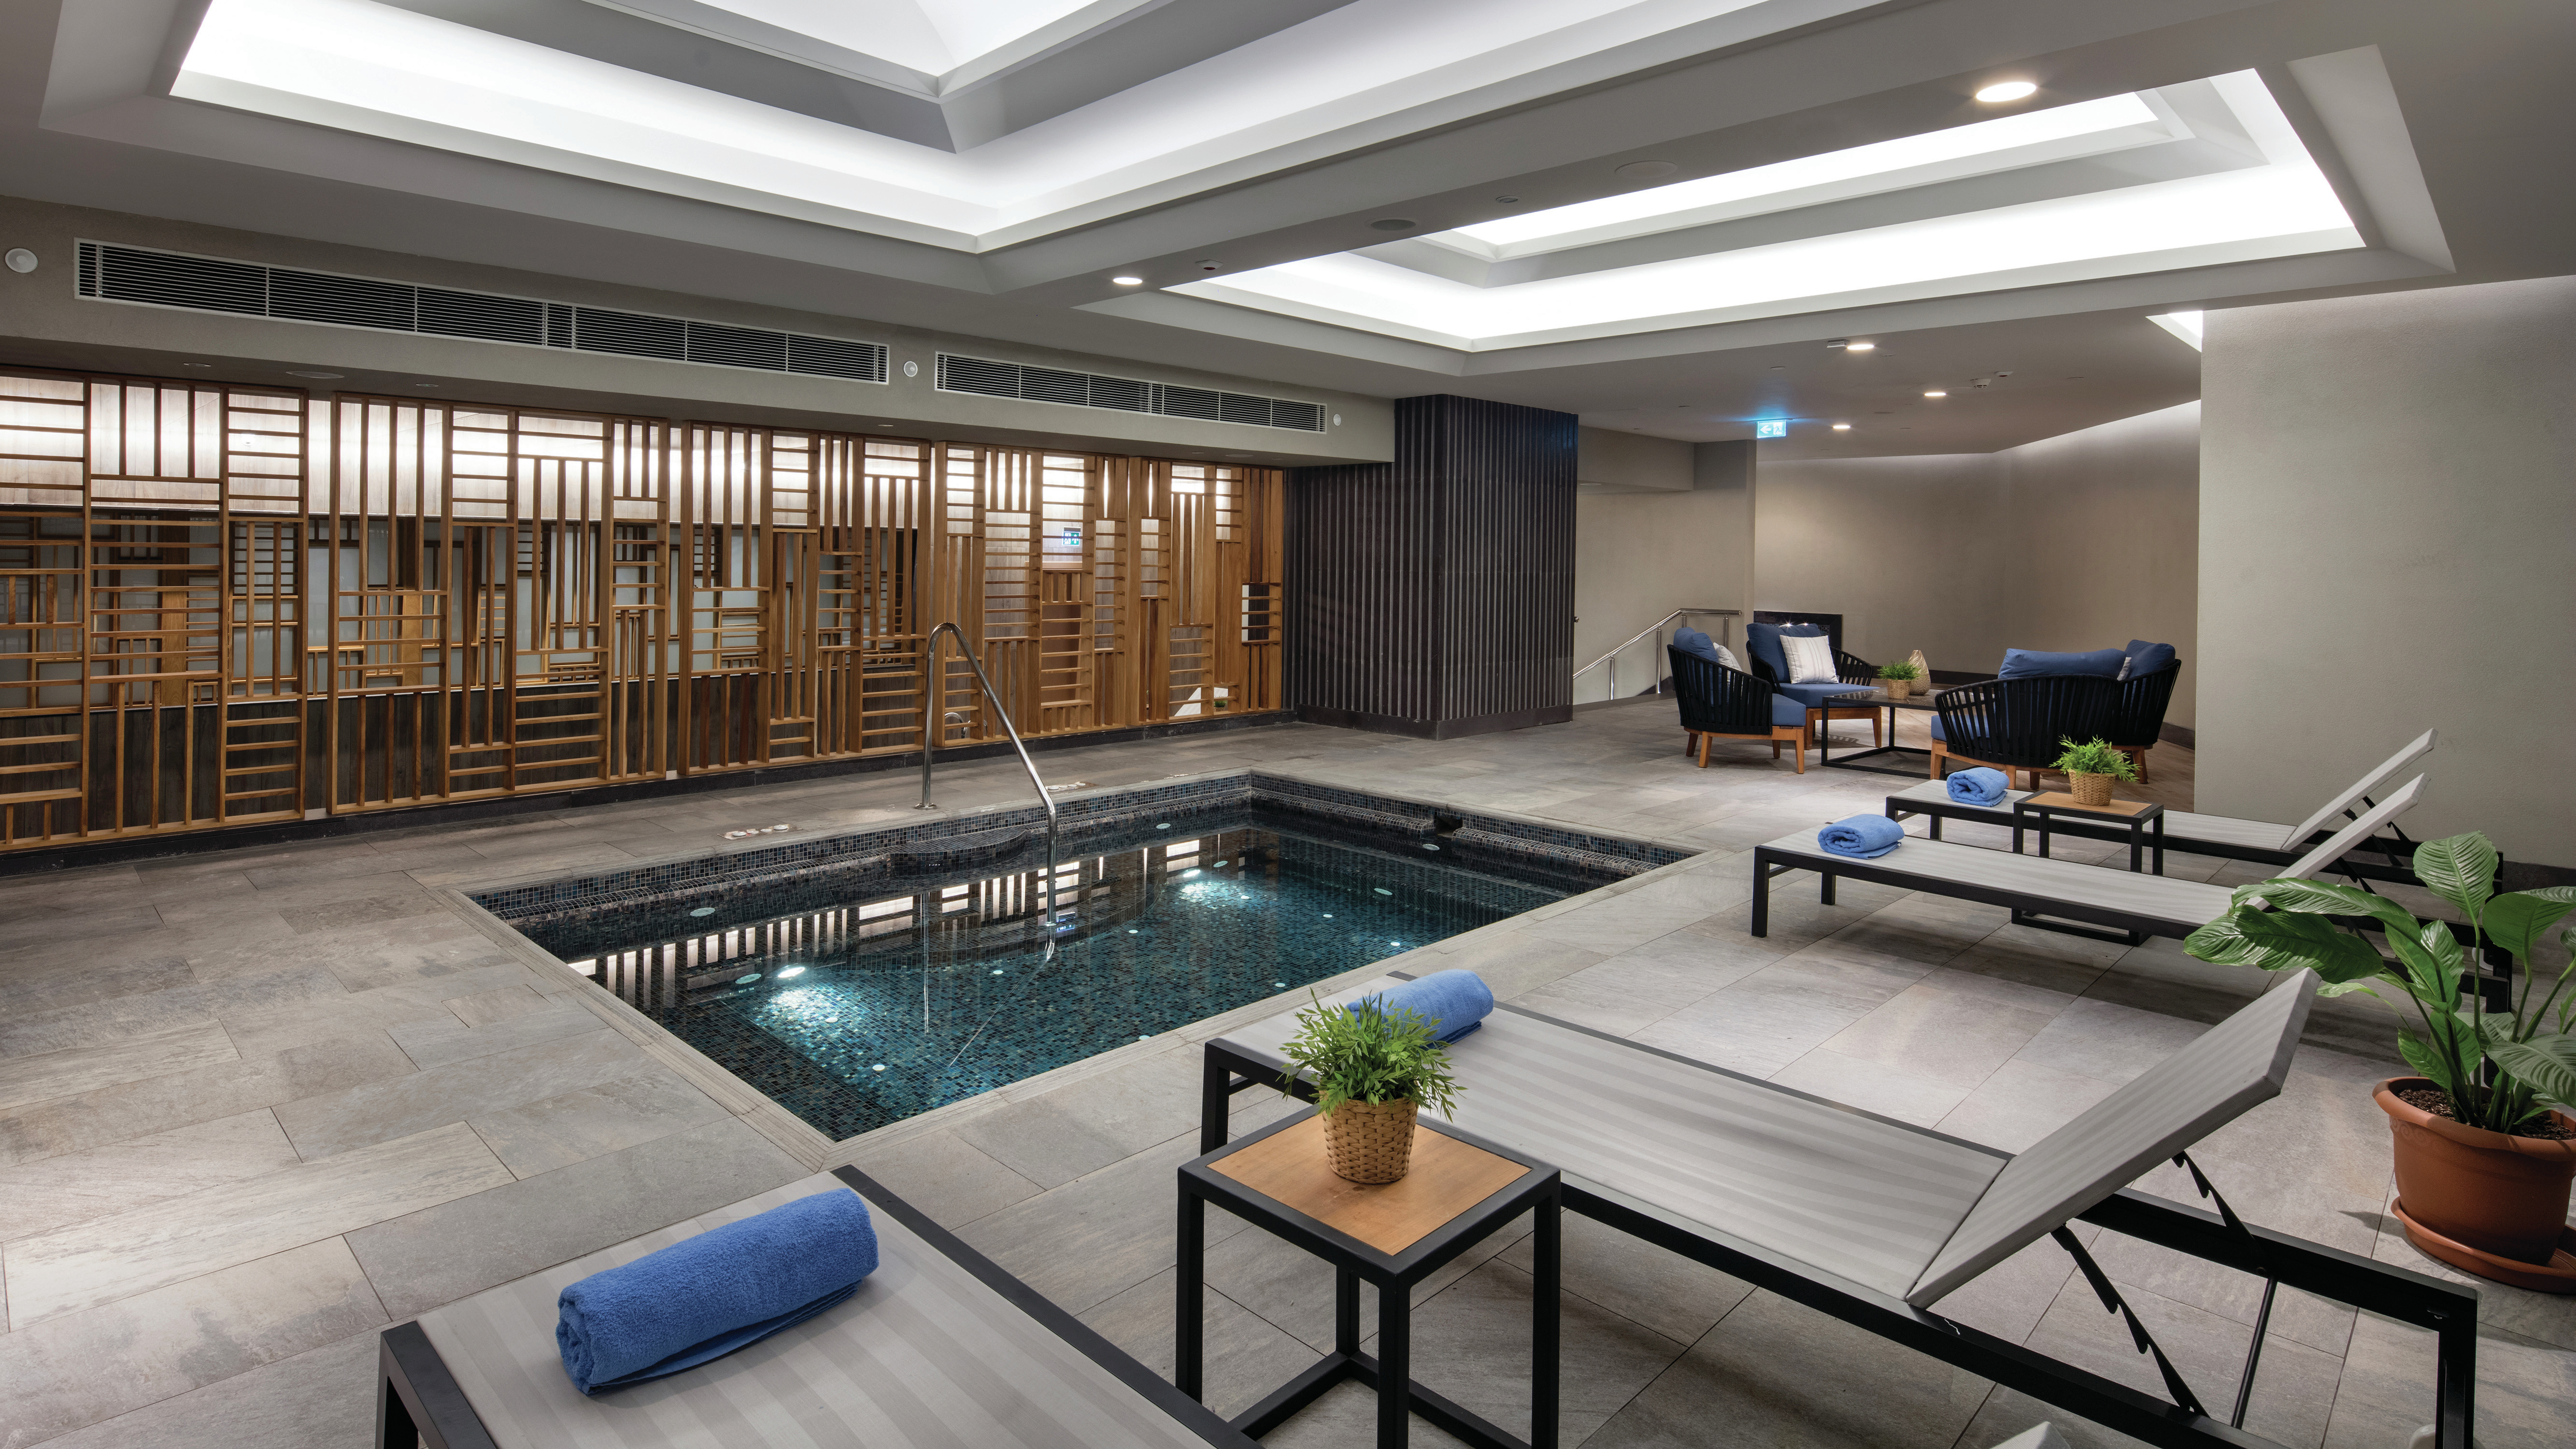 Jetted Pool with Lounge Chairs